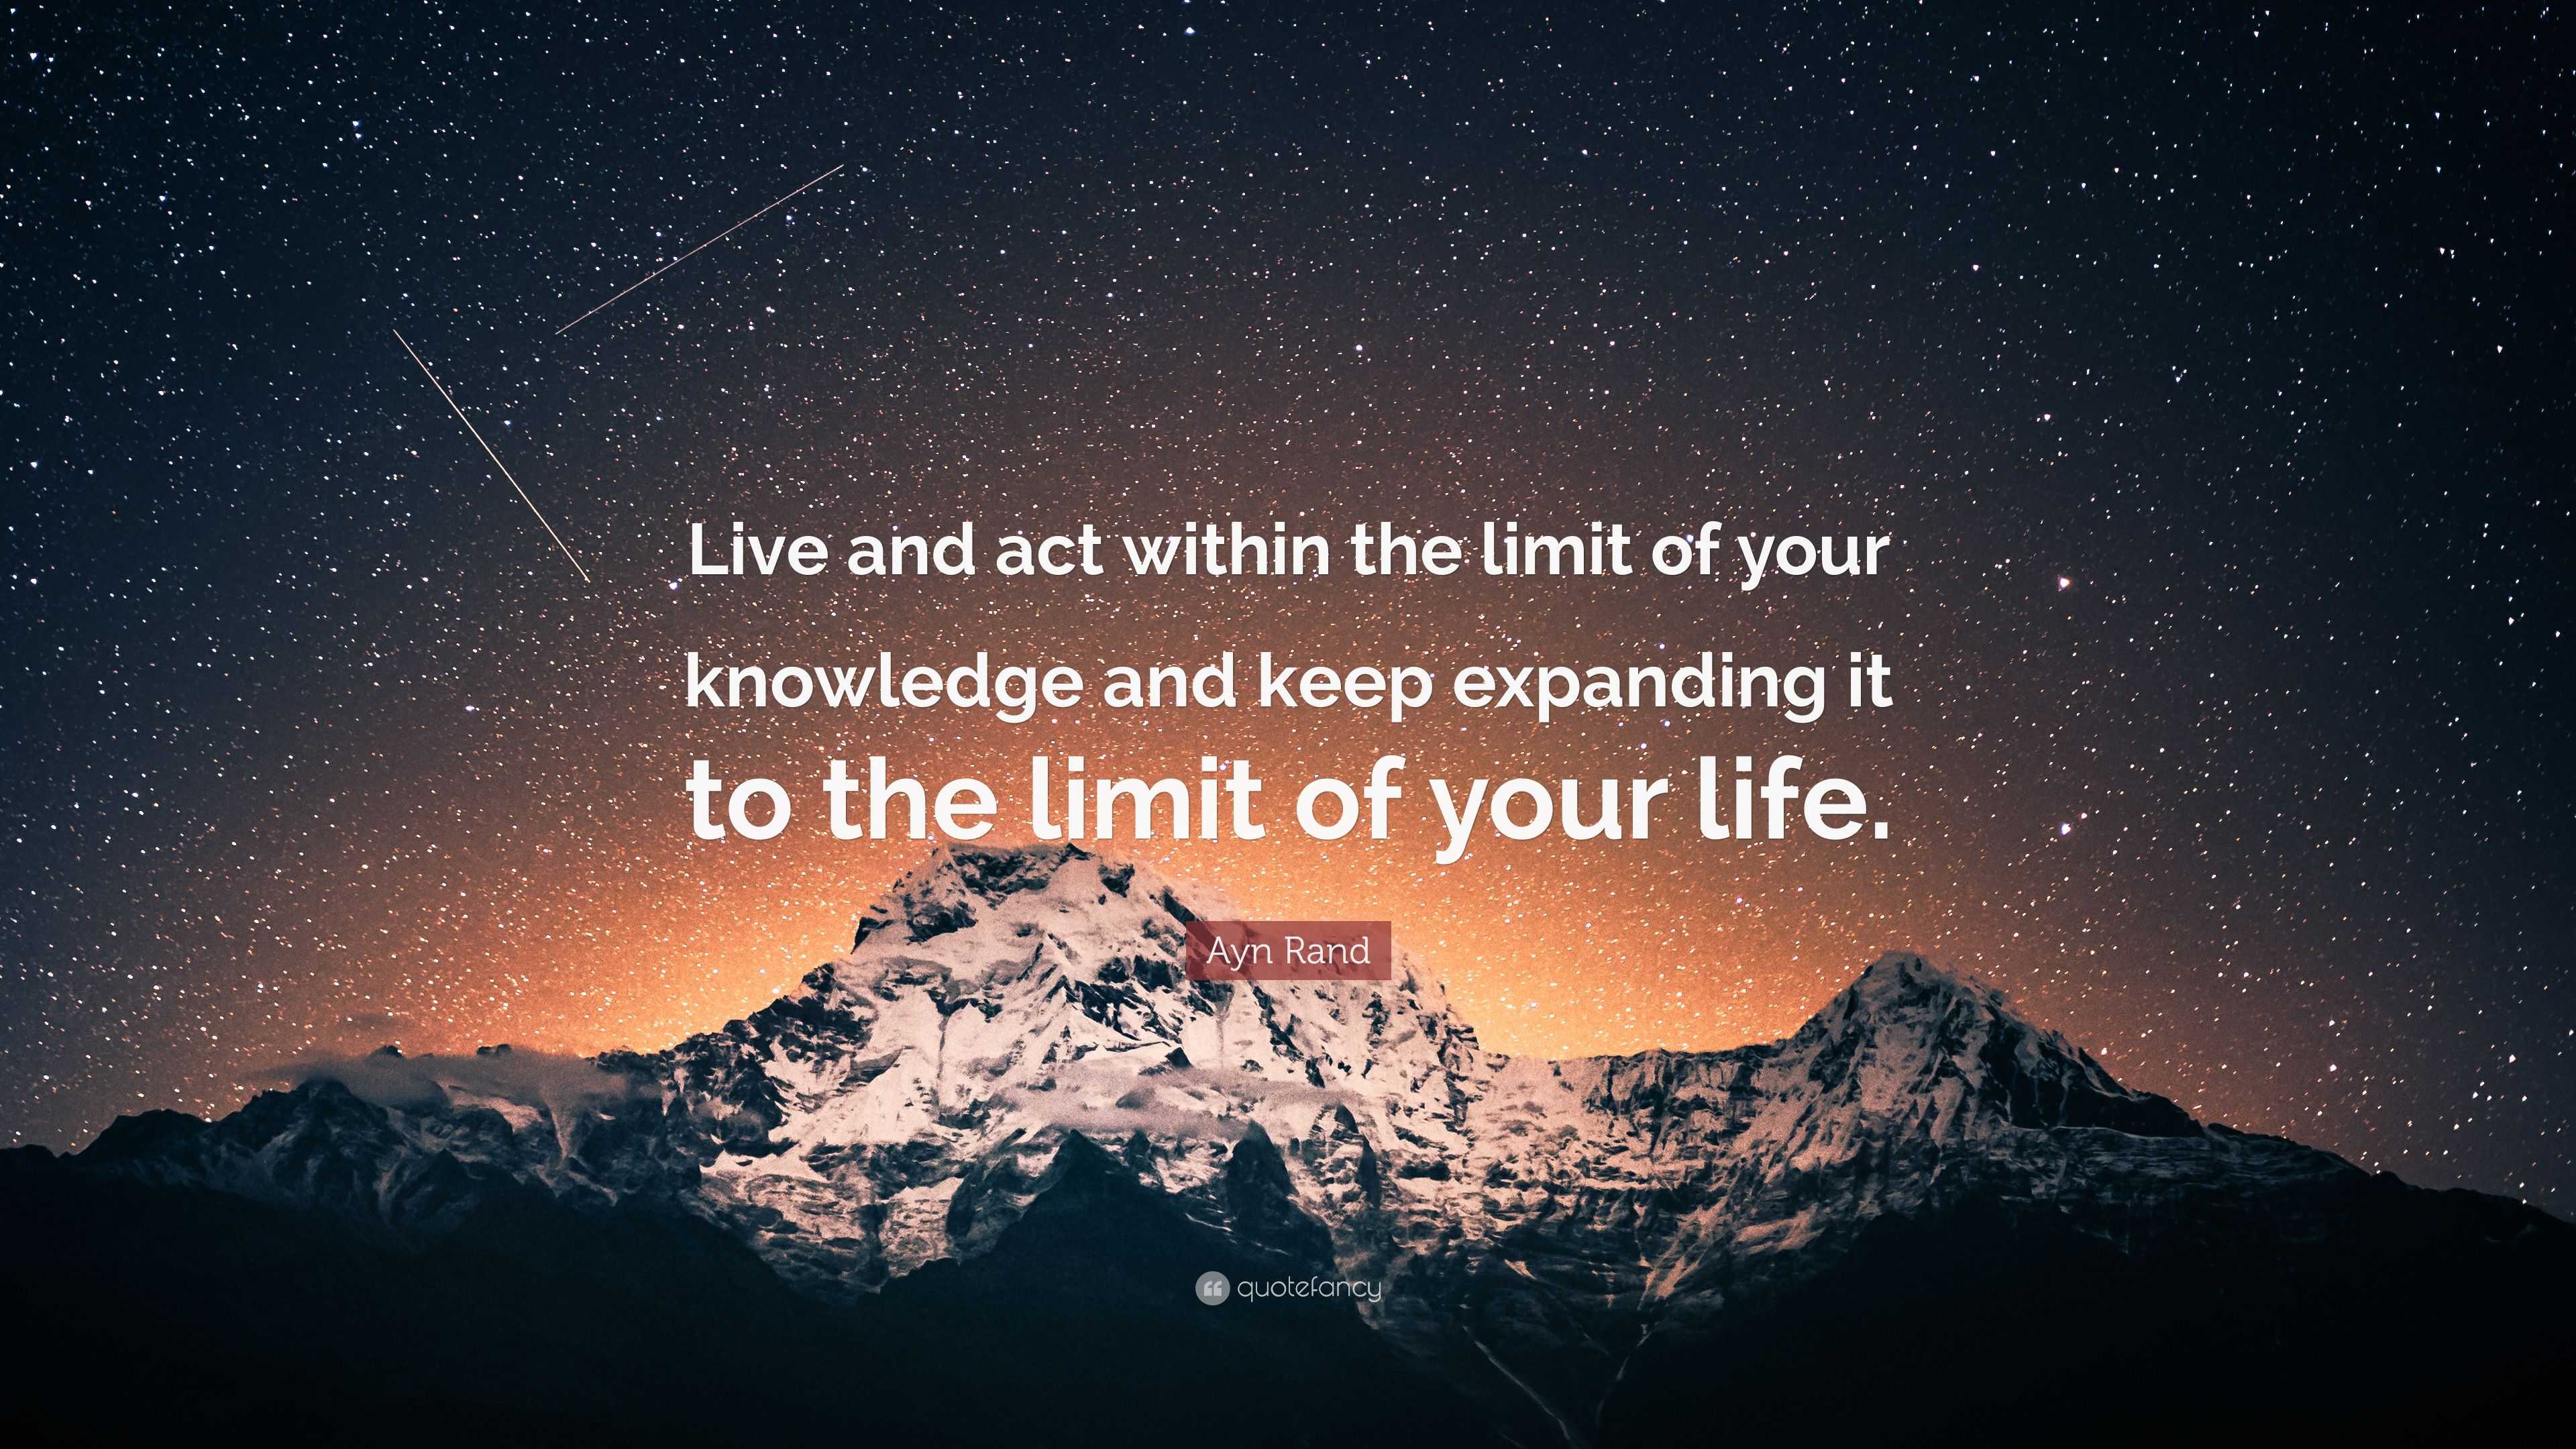 Ayn Rand Quote: “Live and act within the limit of your knowledge and keep  expanding it